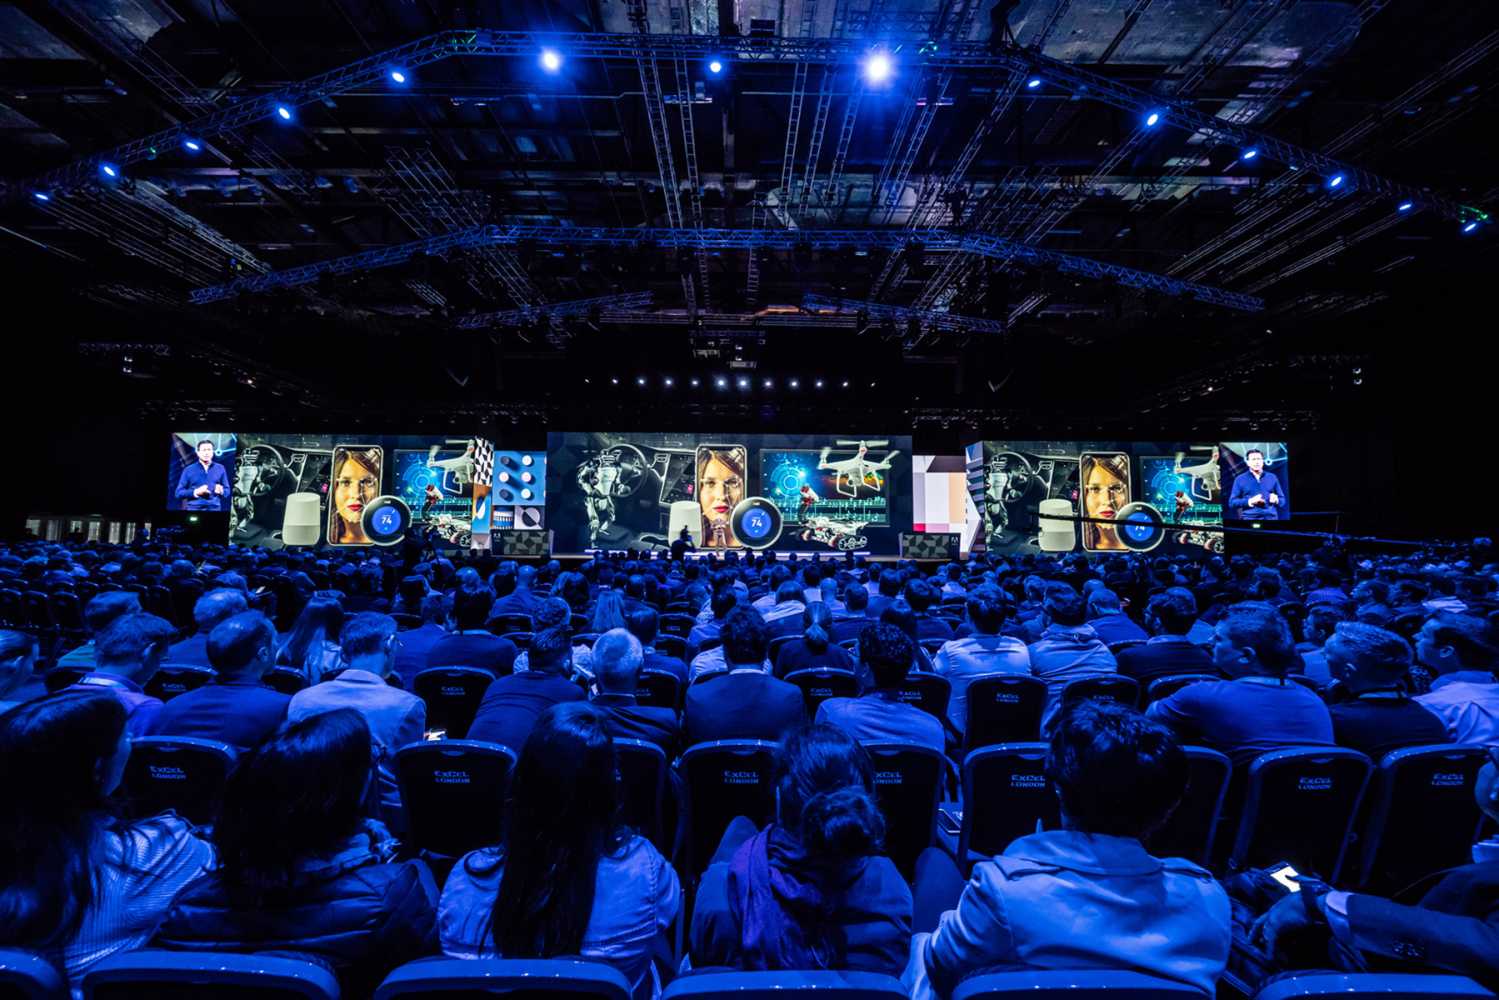 Hawthorn supplies video to numerous large-scale events, including the Adobe Summit